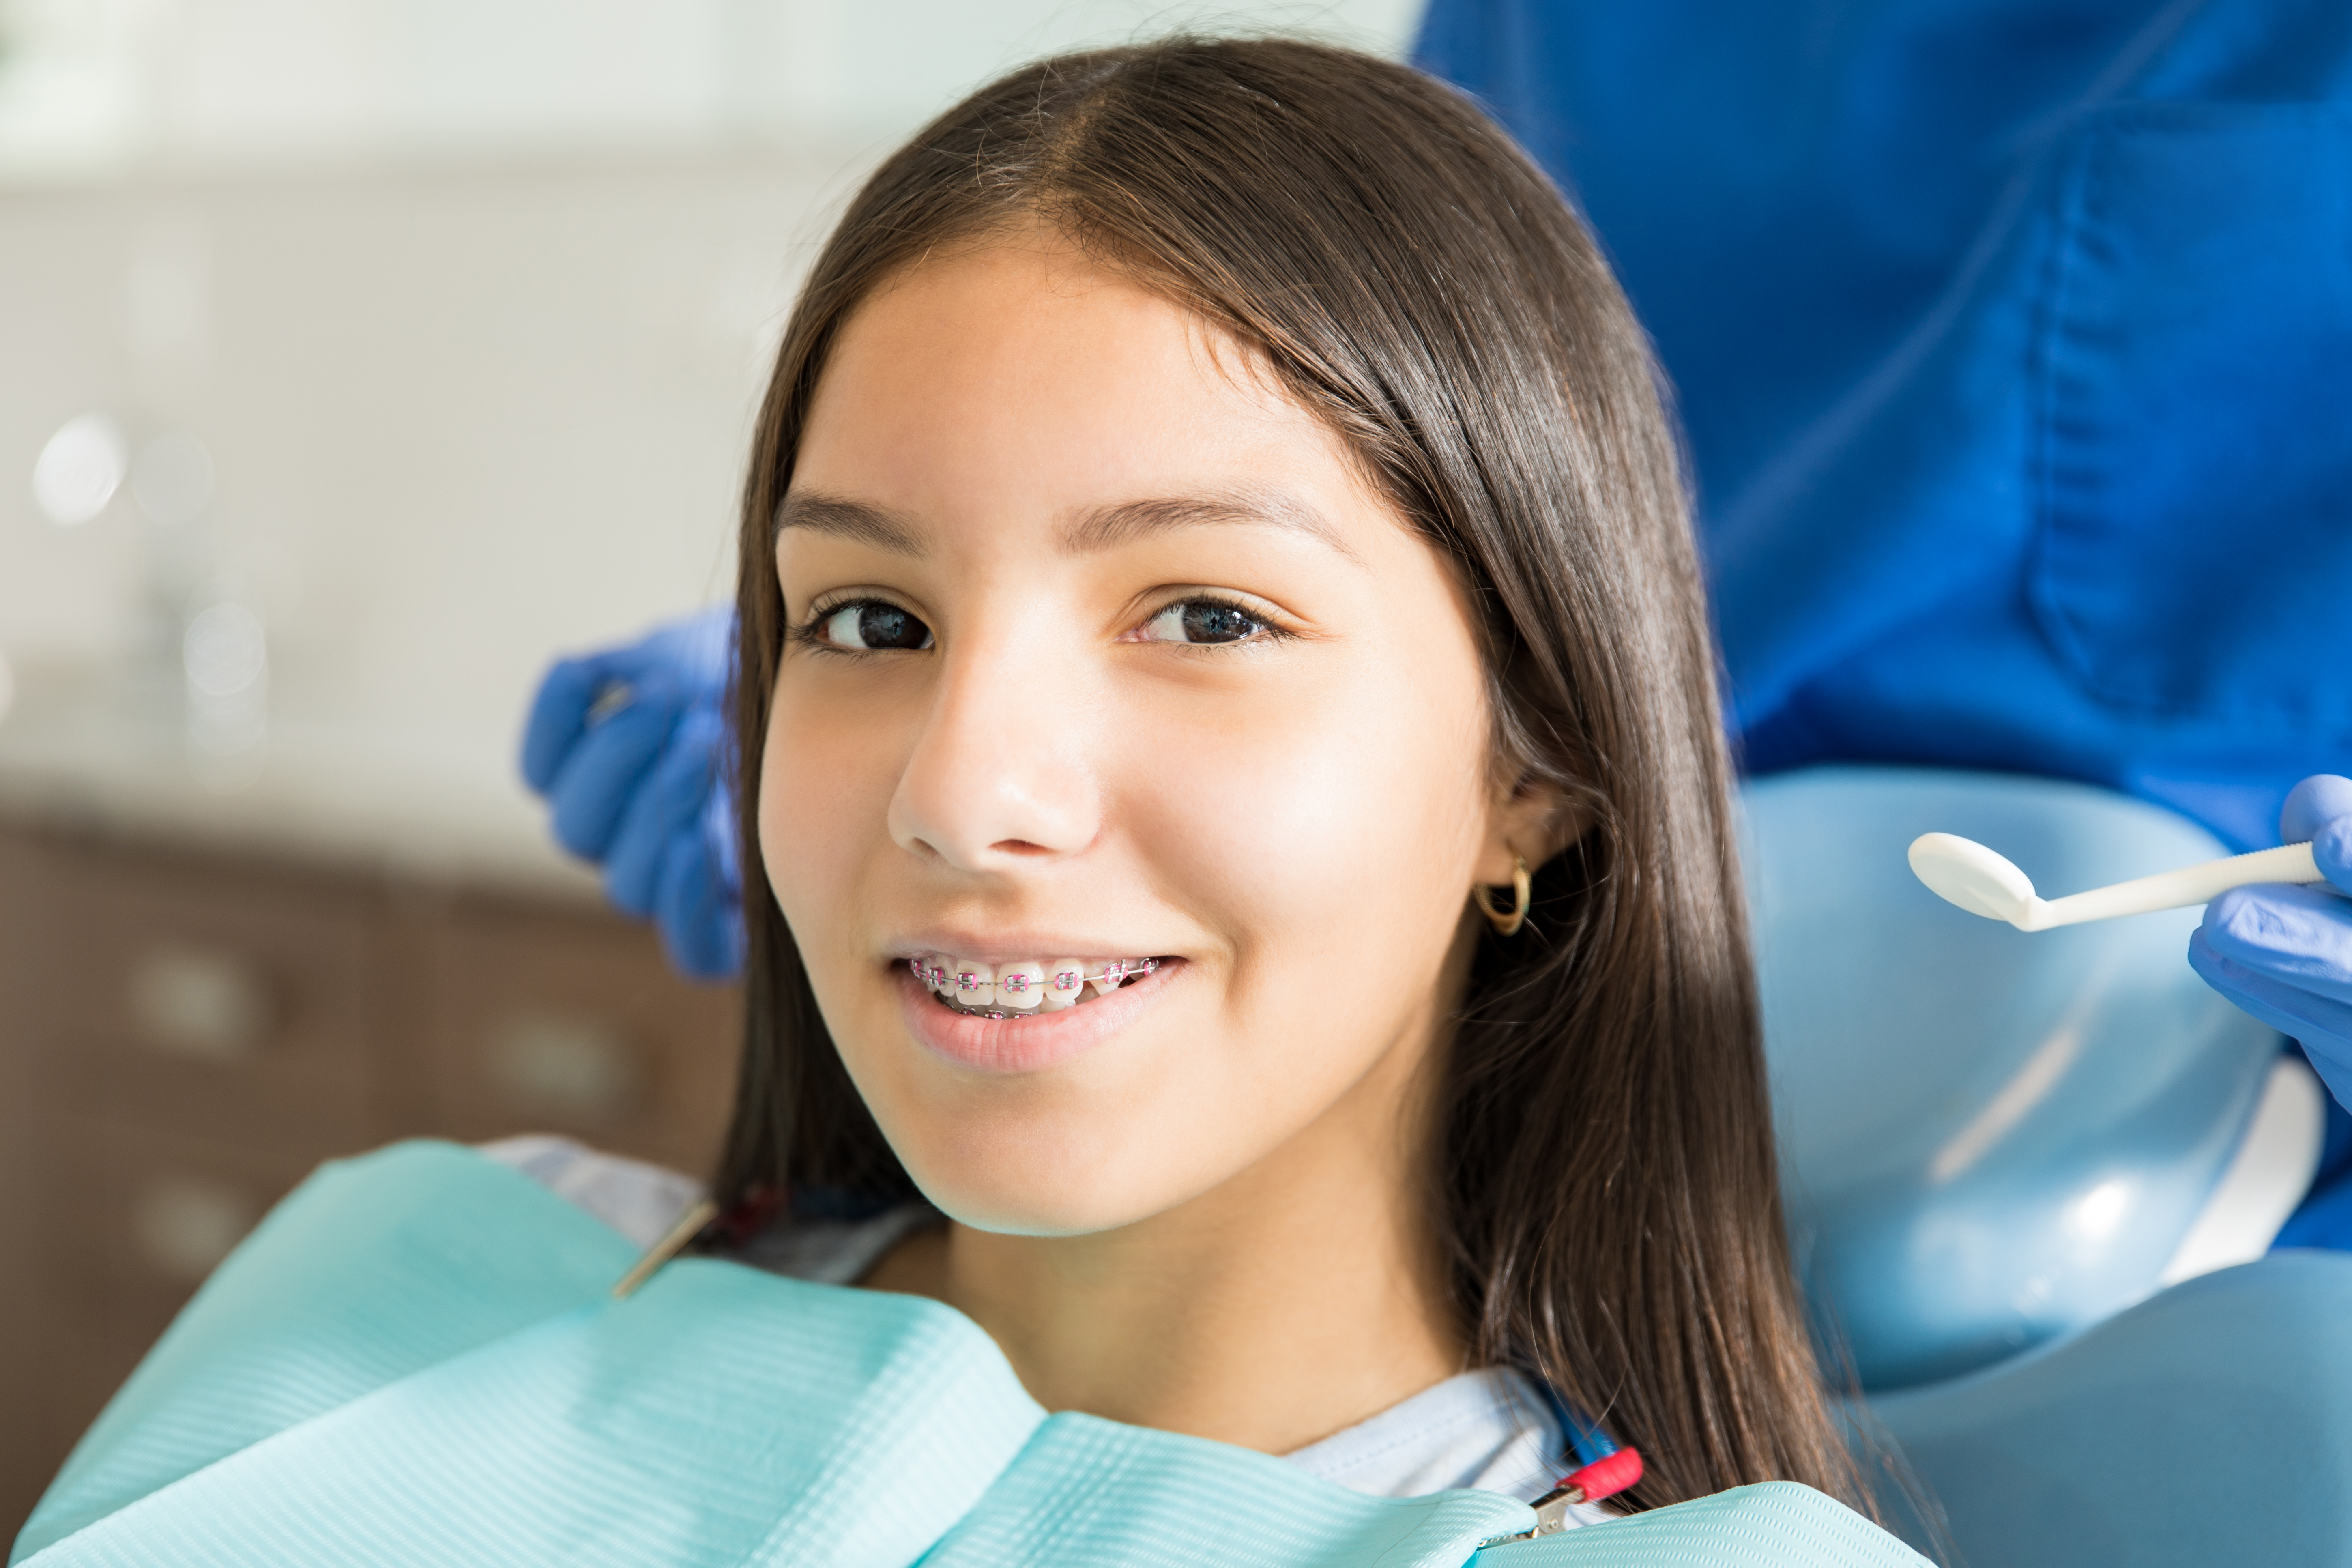 close-up-portrait-smiling-teenage-girl-with-braces-against-dentist-standing-clinic